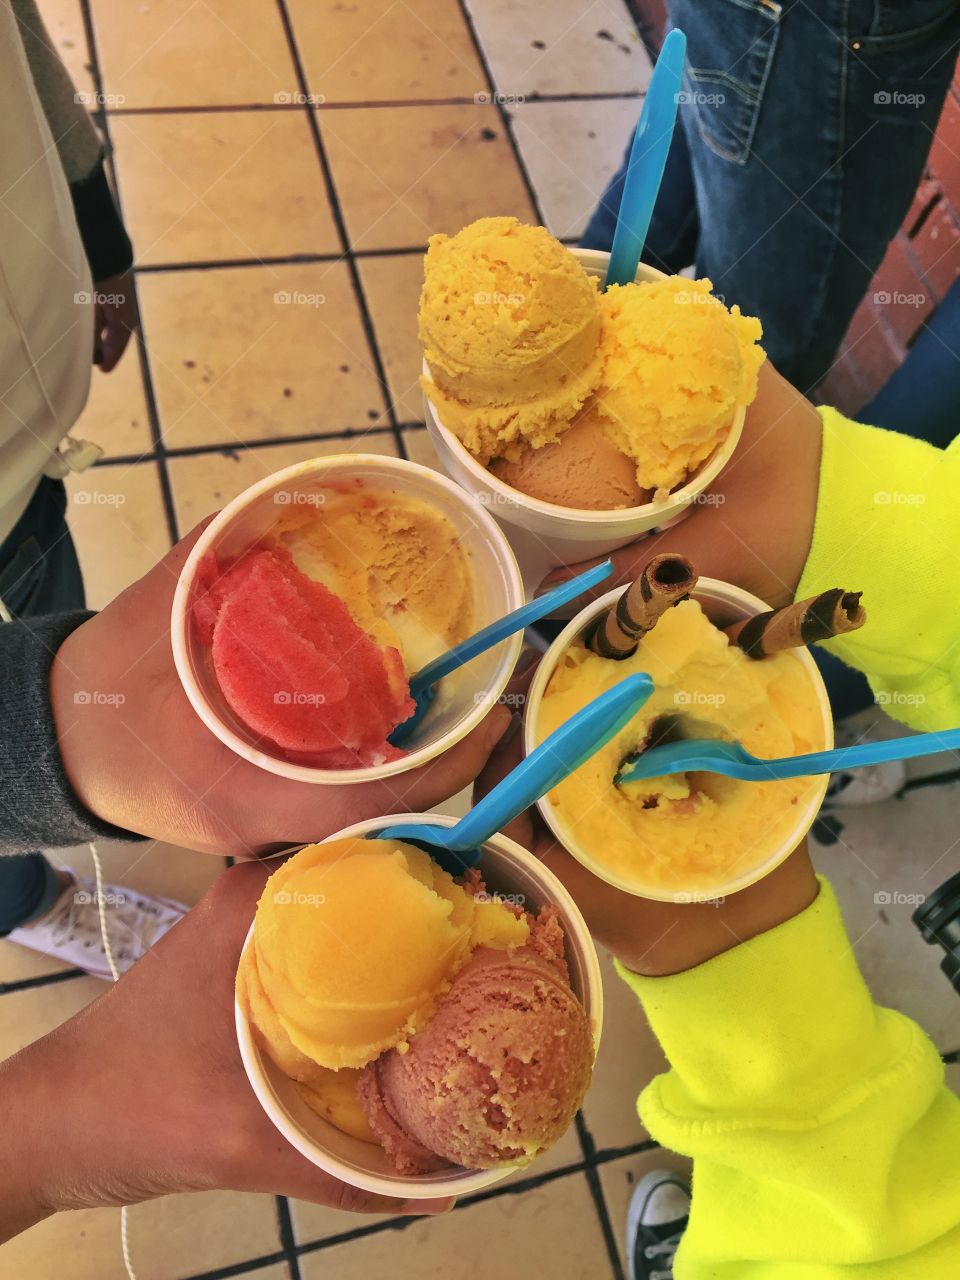 Chepo ice cream in summer with friends